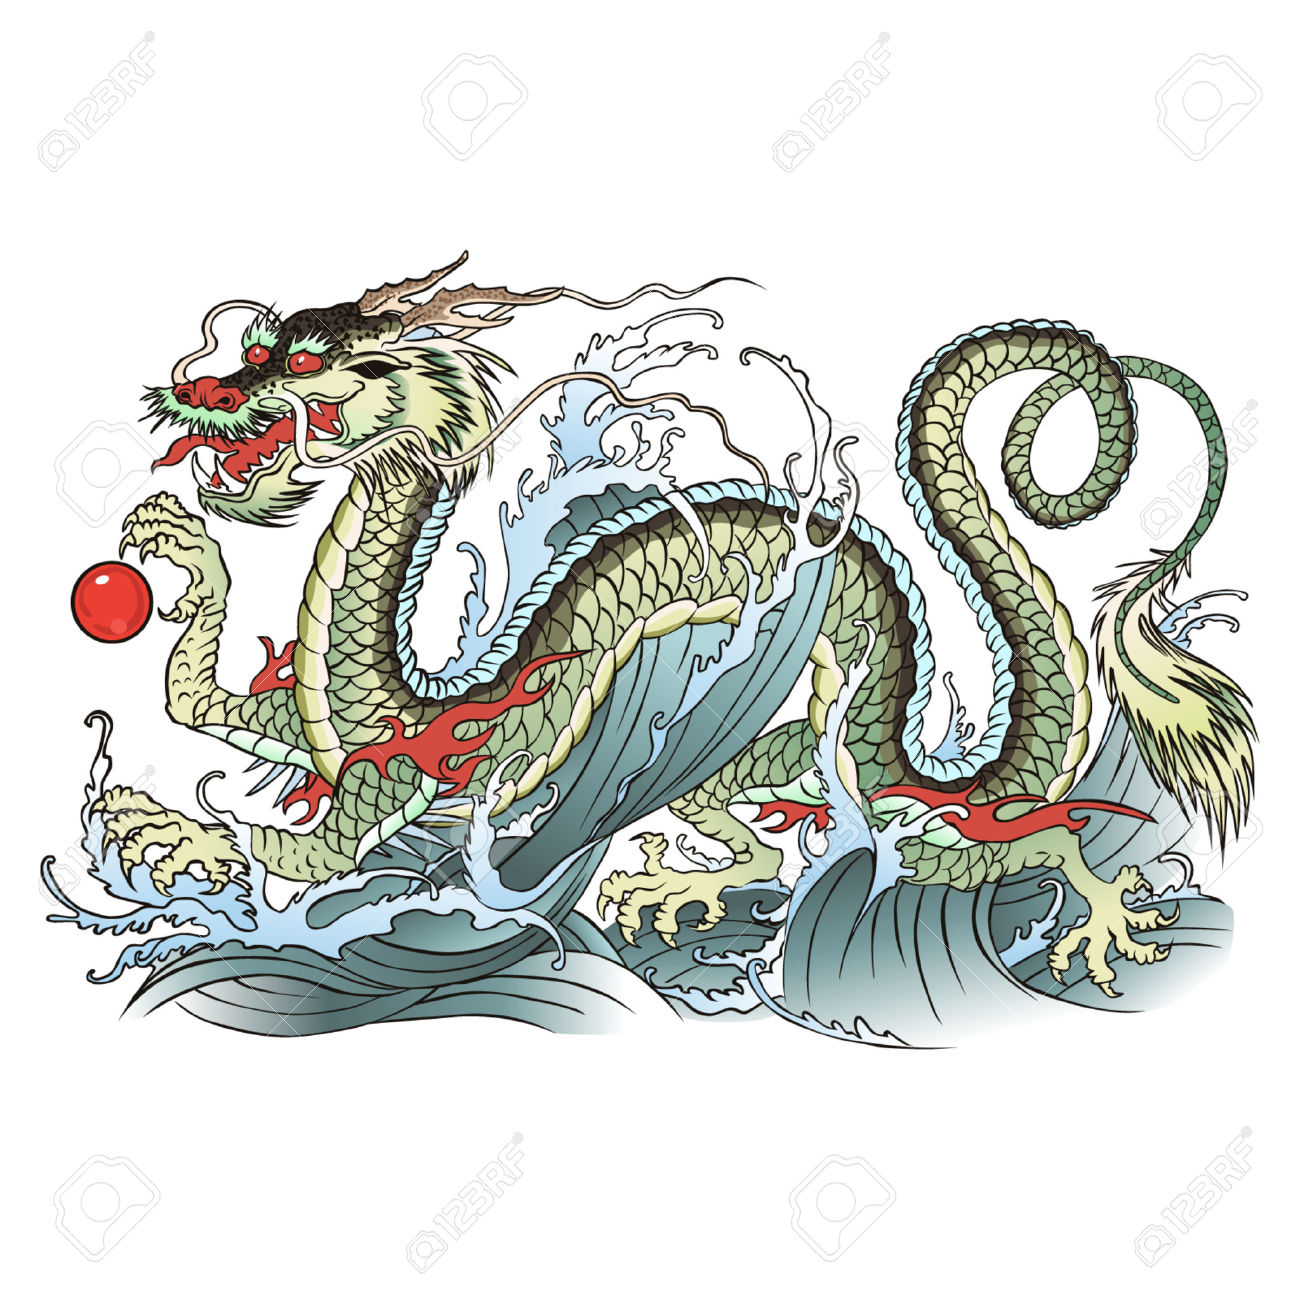 Eastern Water Dragon clipart #4, Download drawings